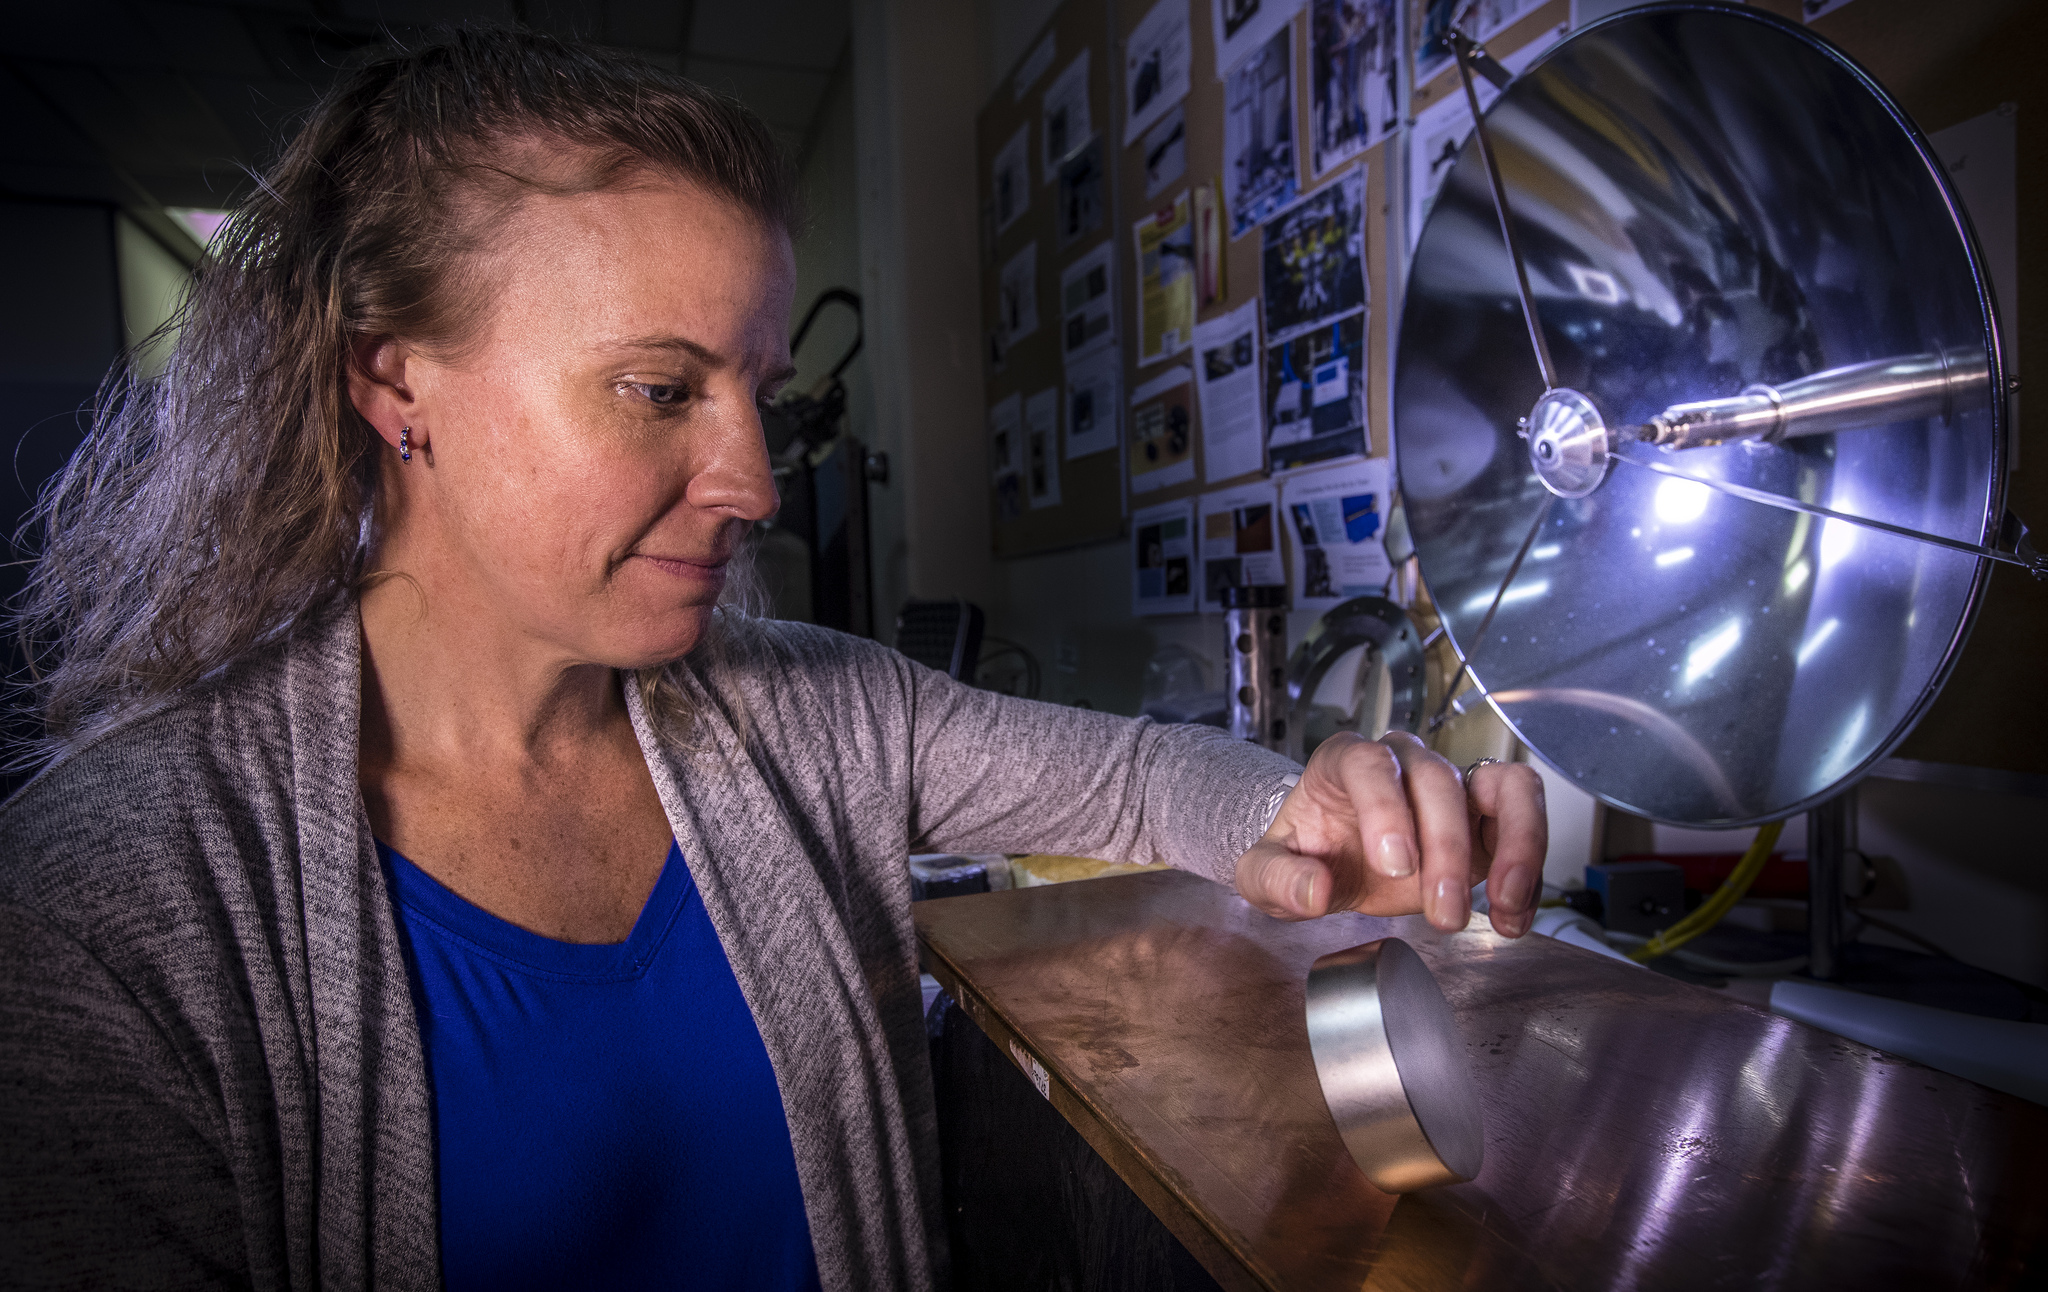 Principal Investigator Dr. Janine Captain demonstrates the effects of moving a magnet against metal in the Applied Physics Laboratory at NASA’s Kennedy Space Center in Florida.